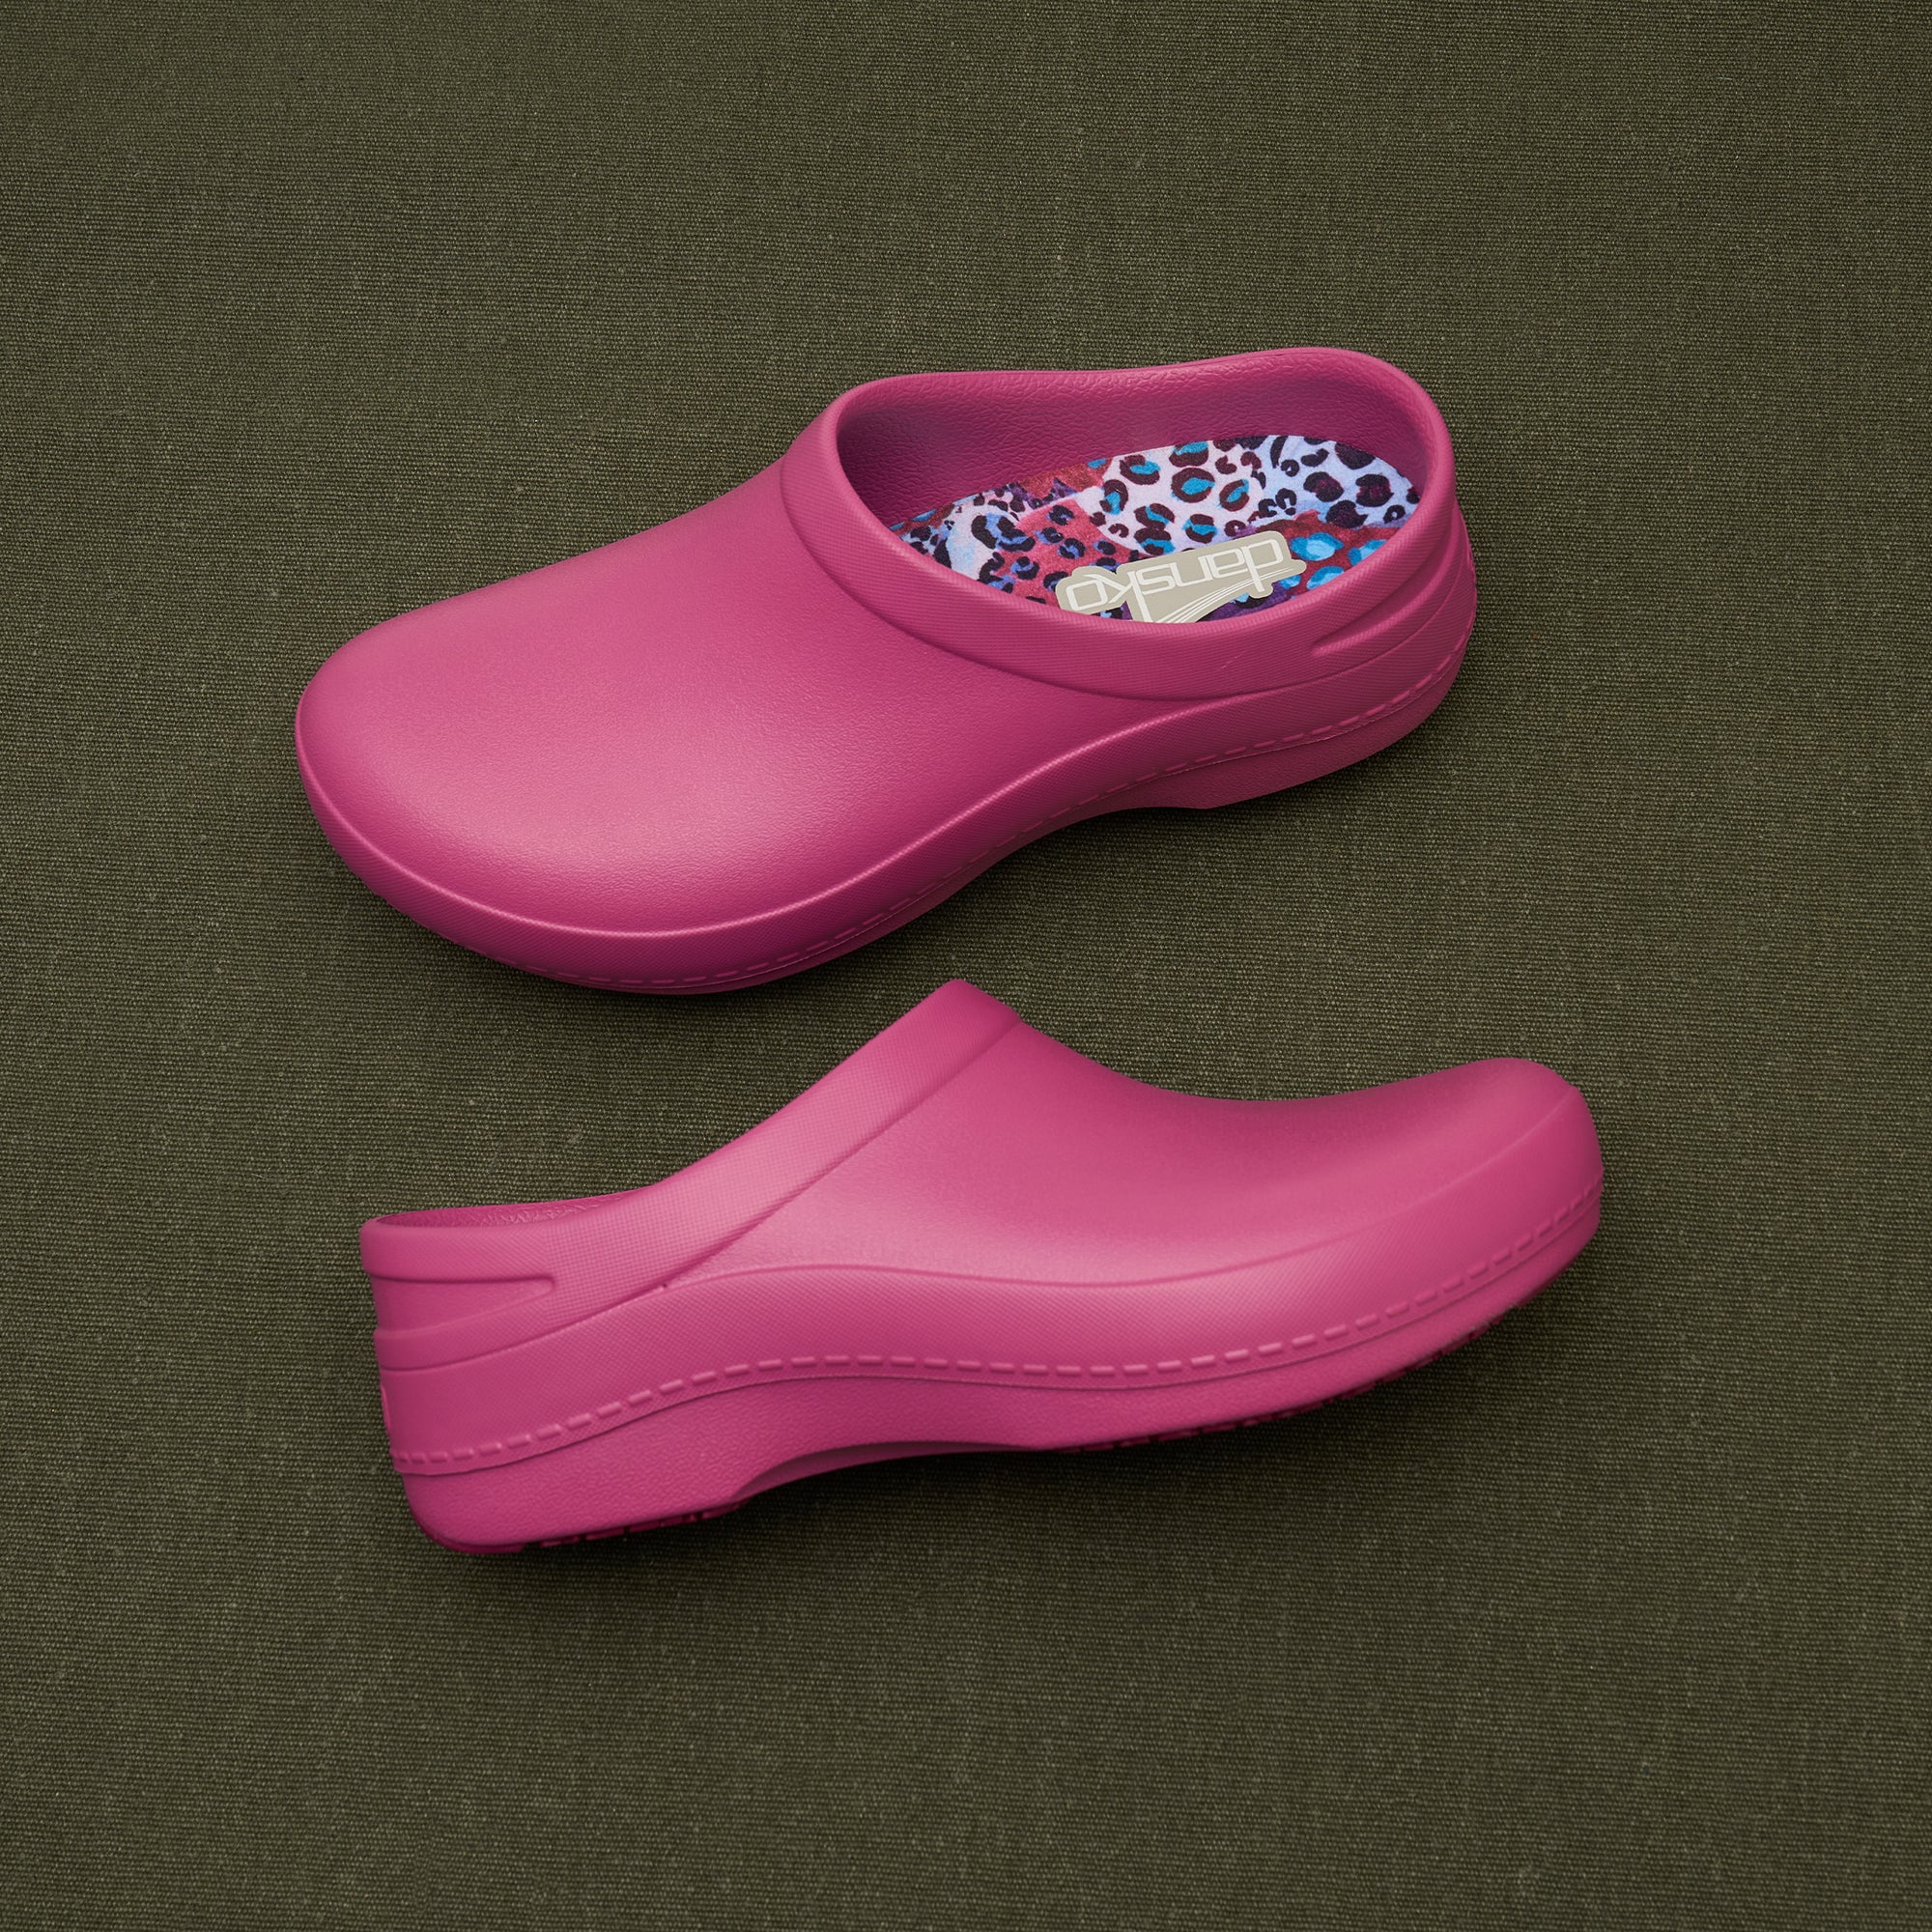 A closeup of pink molded clogs showing the insole design and the upper silhouette.